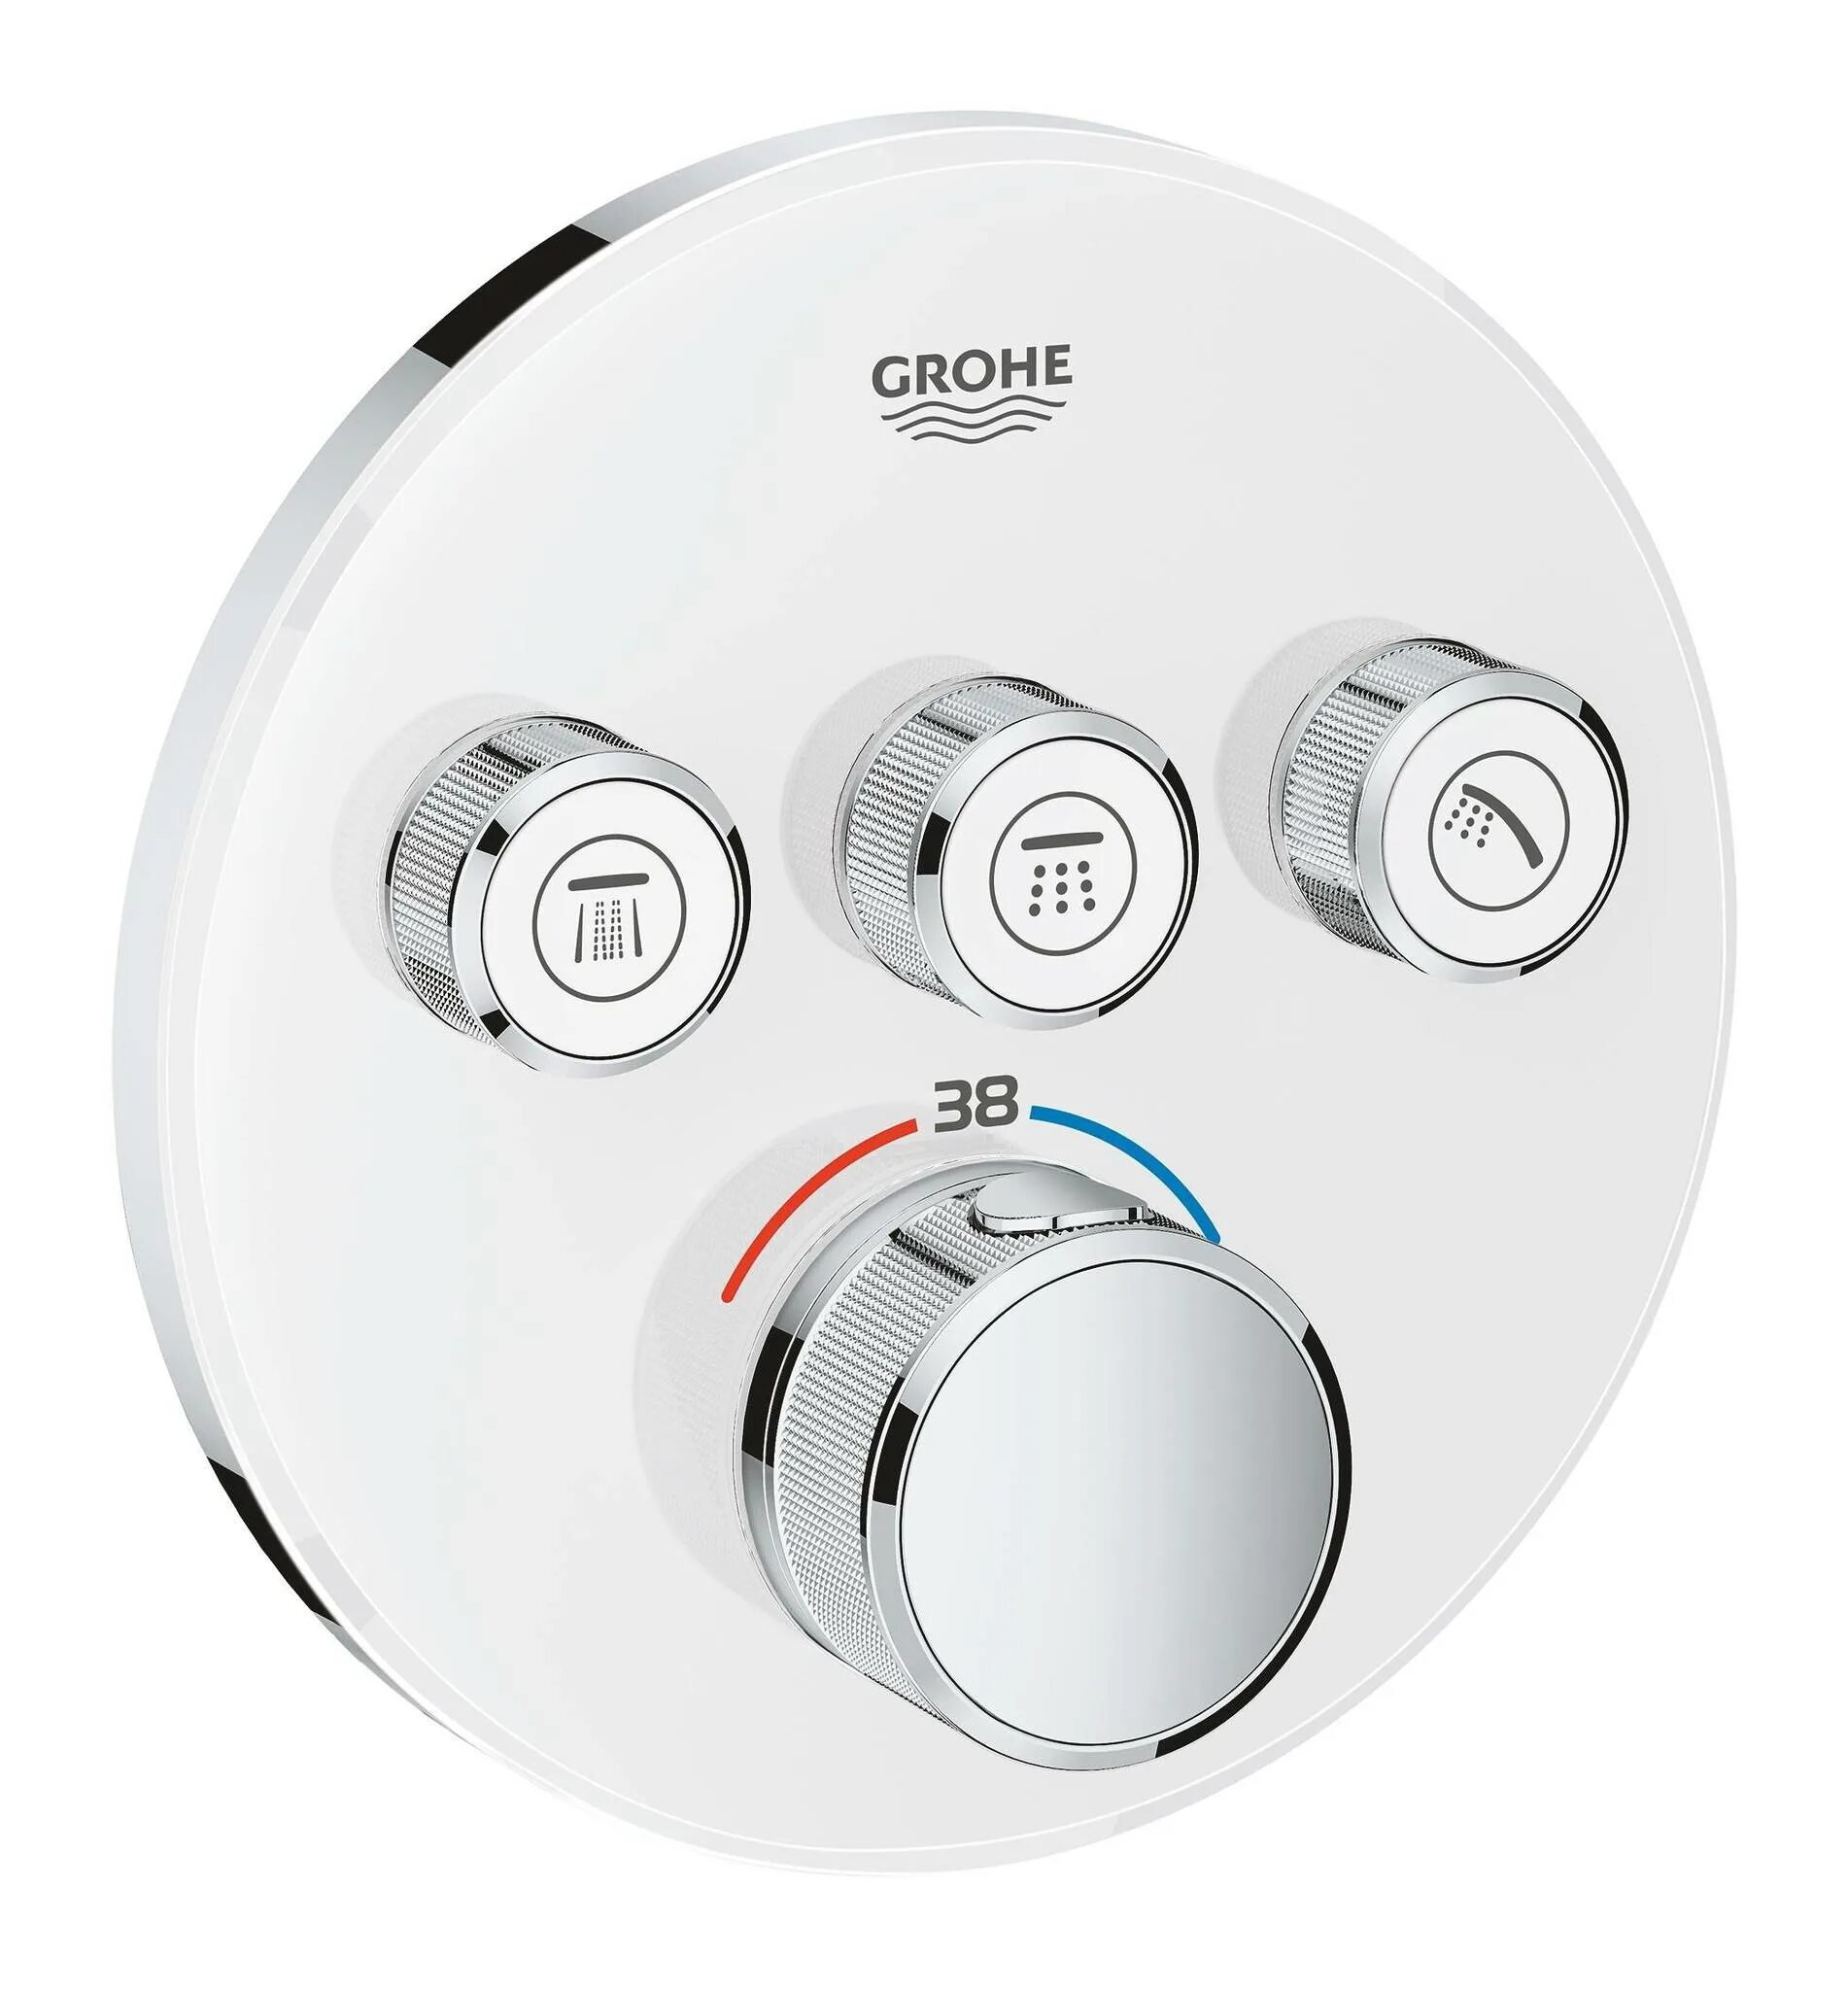 Grohe Grohtherm SMARTCONTROL 29149000. Термостат Grohe 29125000. Grohe SMARTCONTROL термостат. Термостат Grohe Grohtherm SMARTCONTROL.